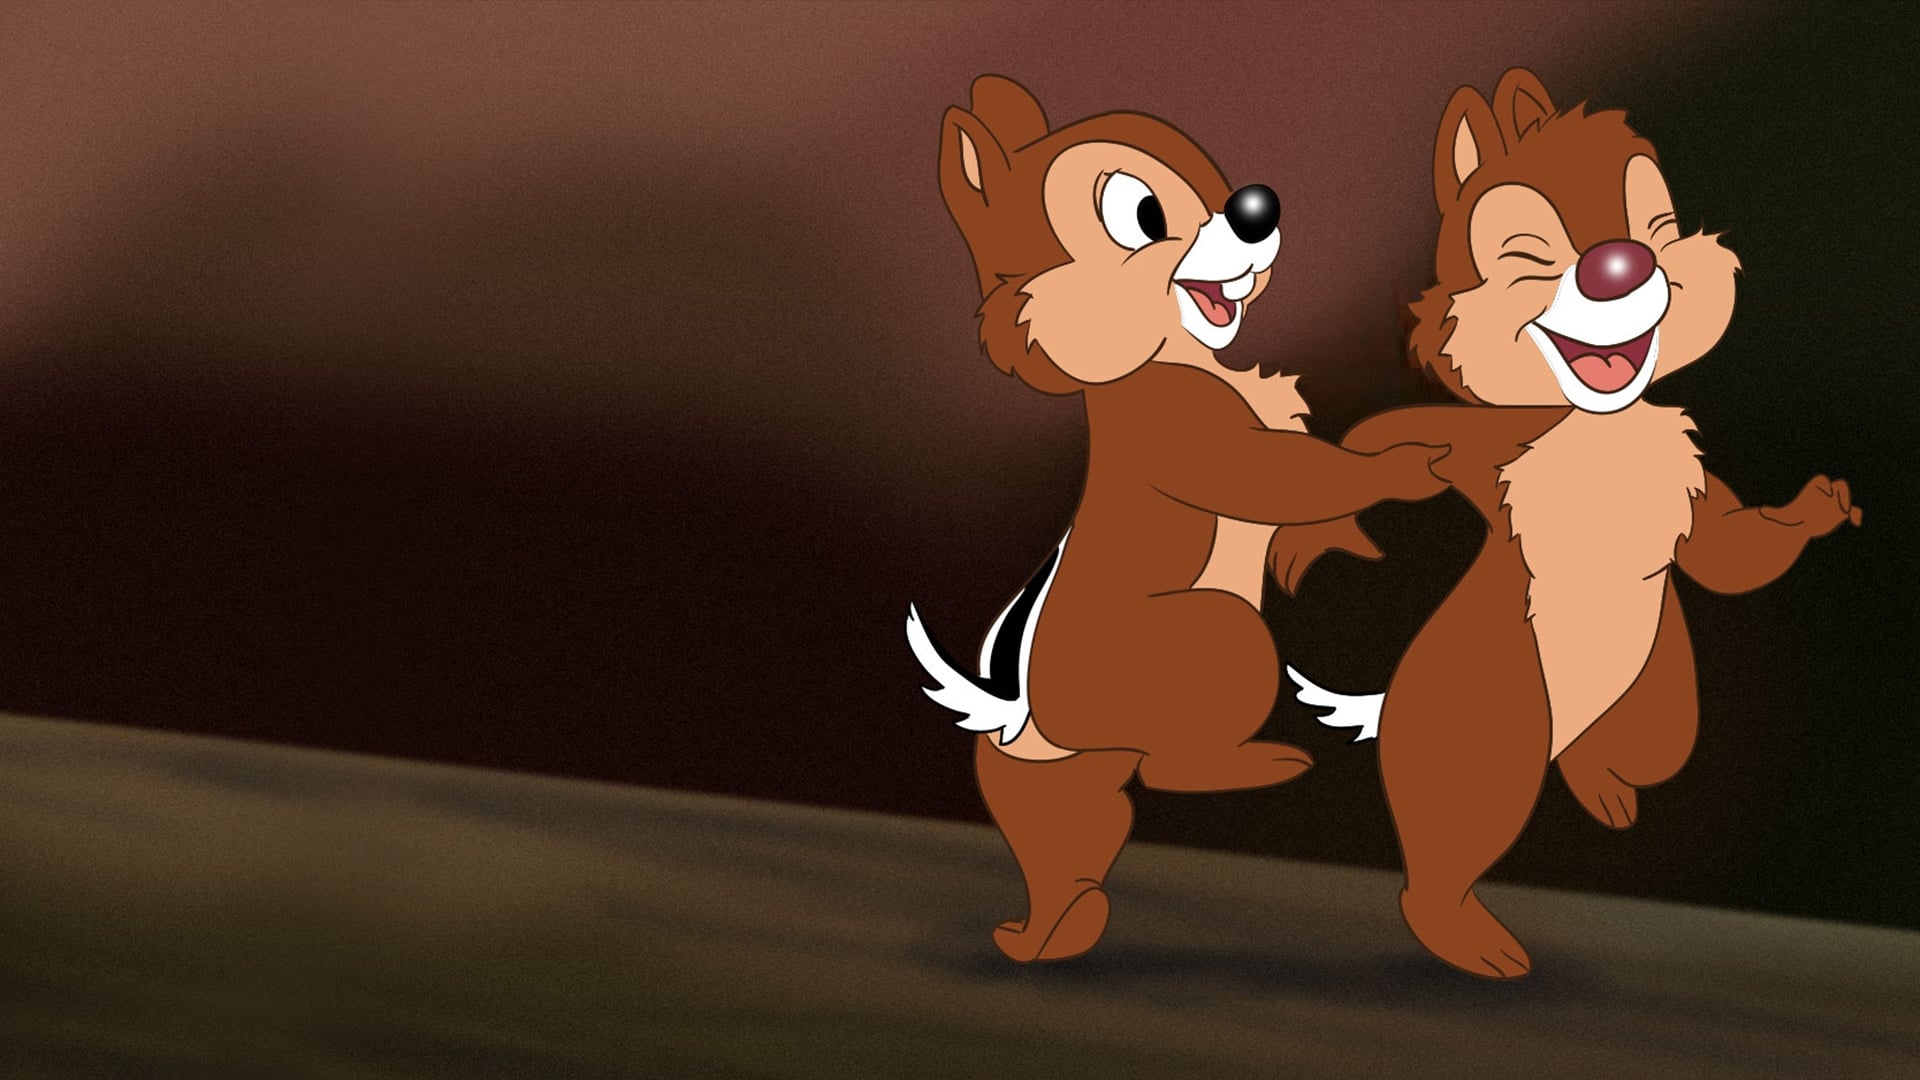 Chip an' Dale